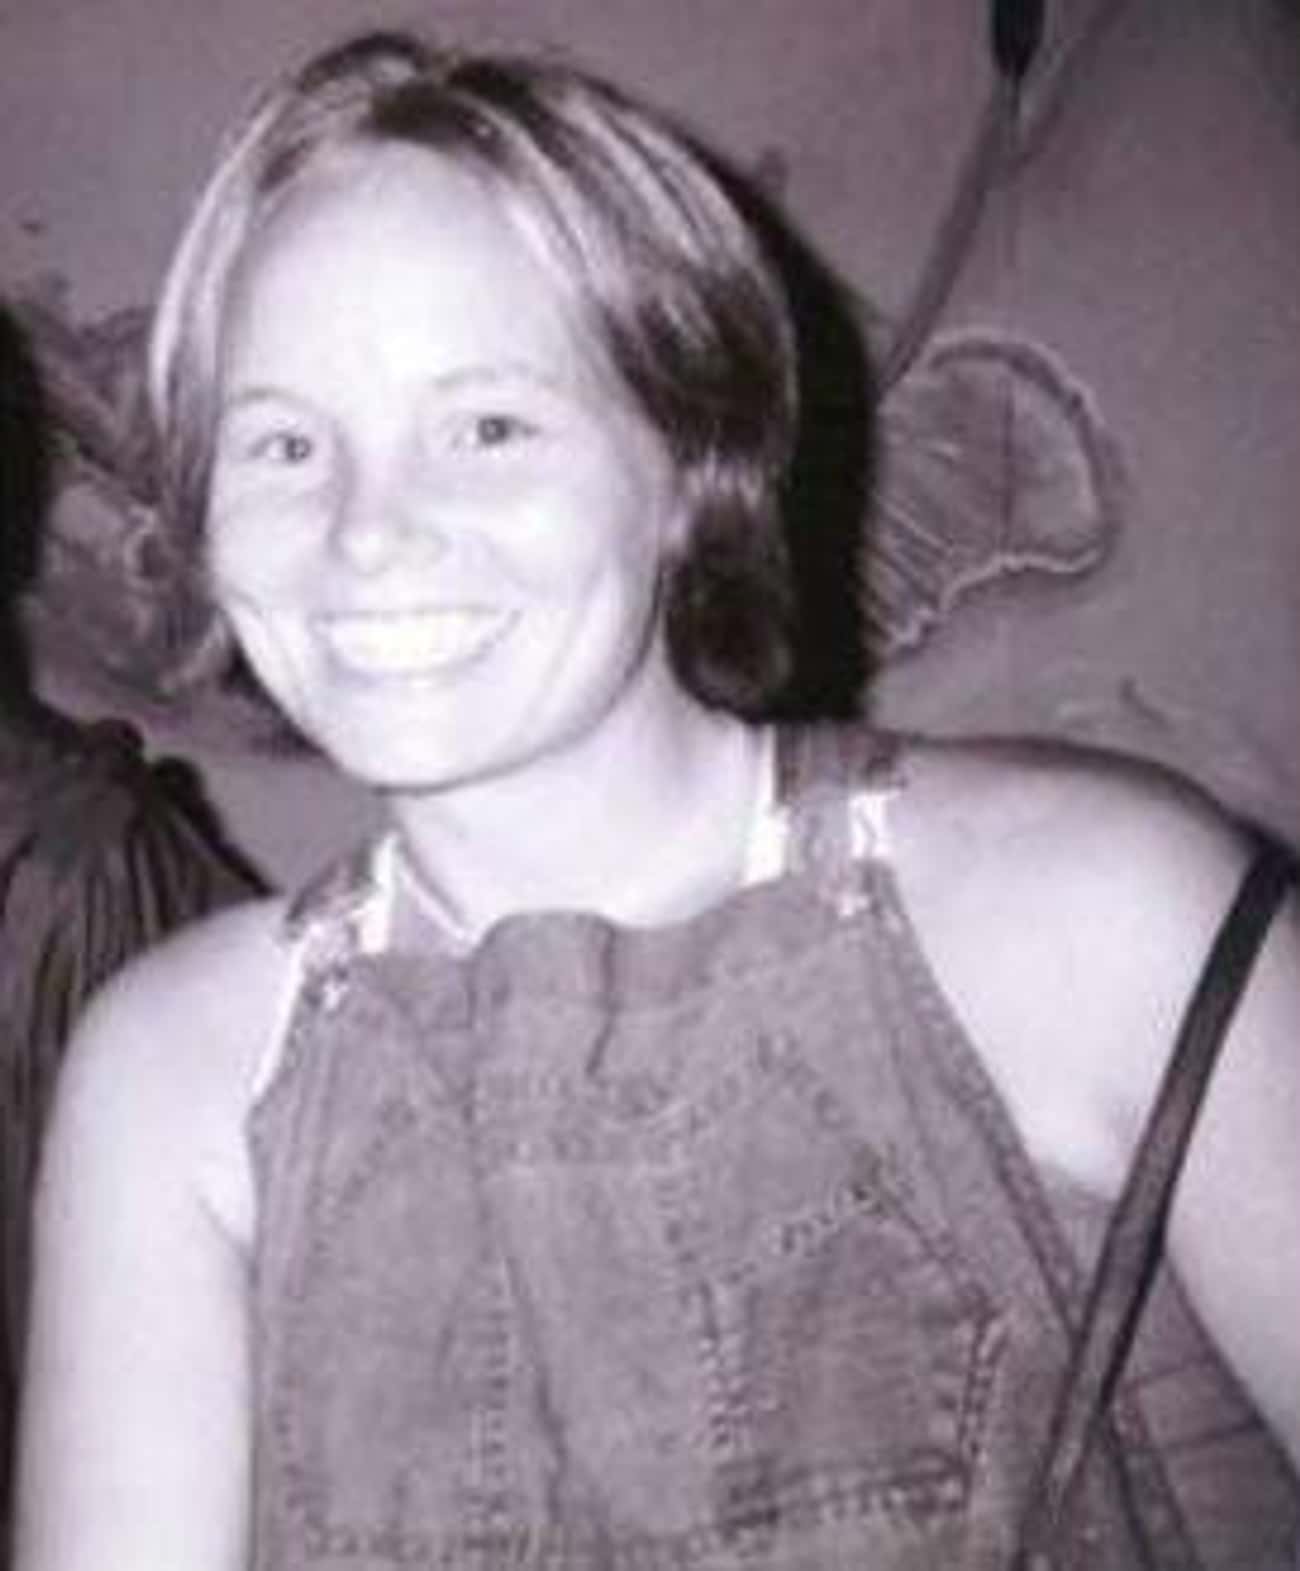 Roberts's Family Believes She Left On Her Own From Durham, North Carolina, In March 2000